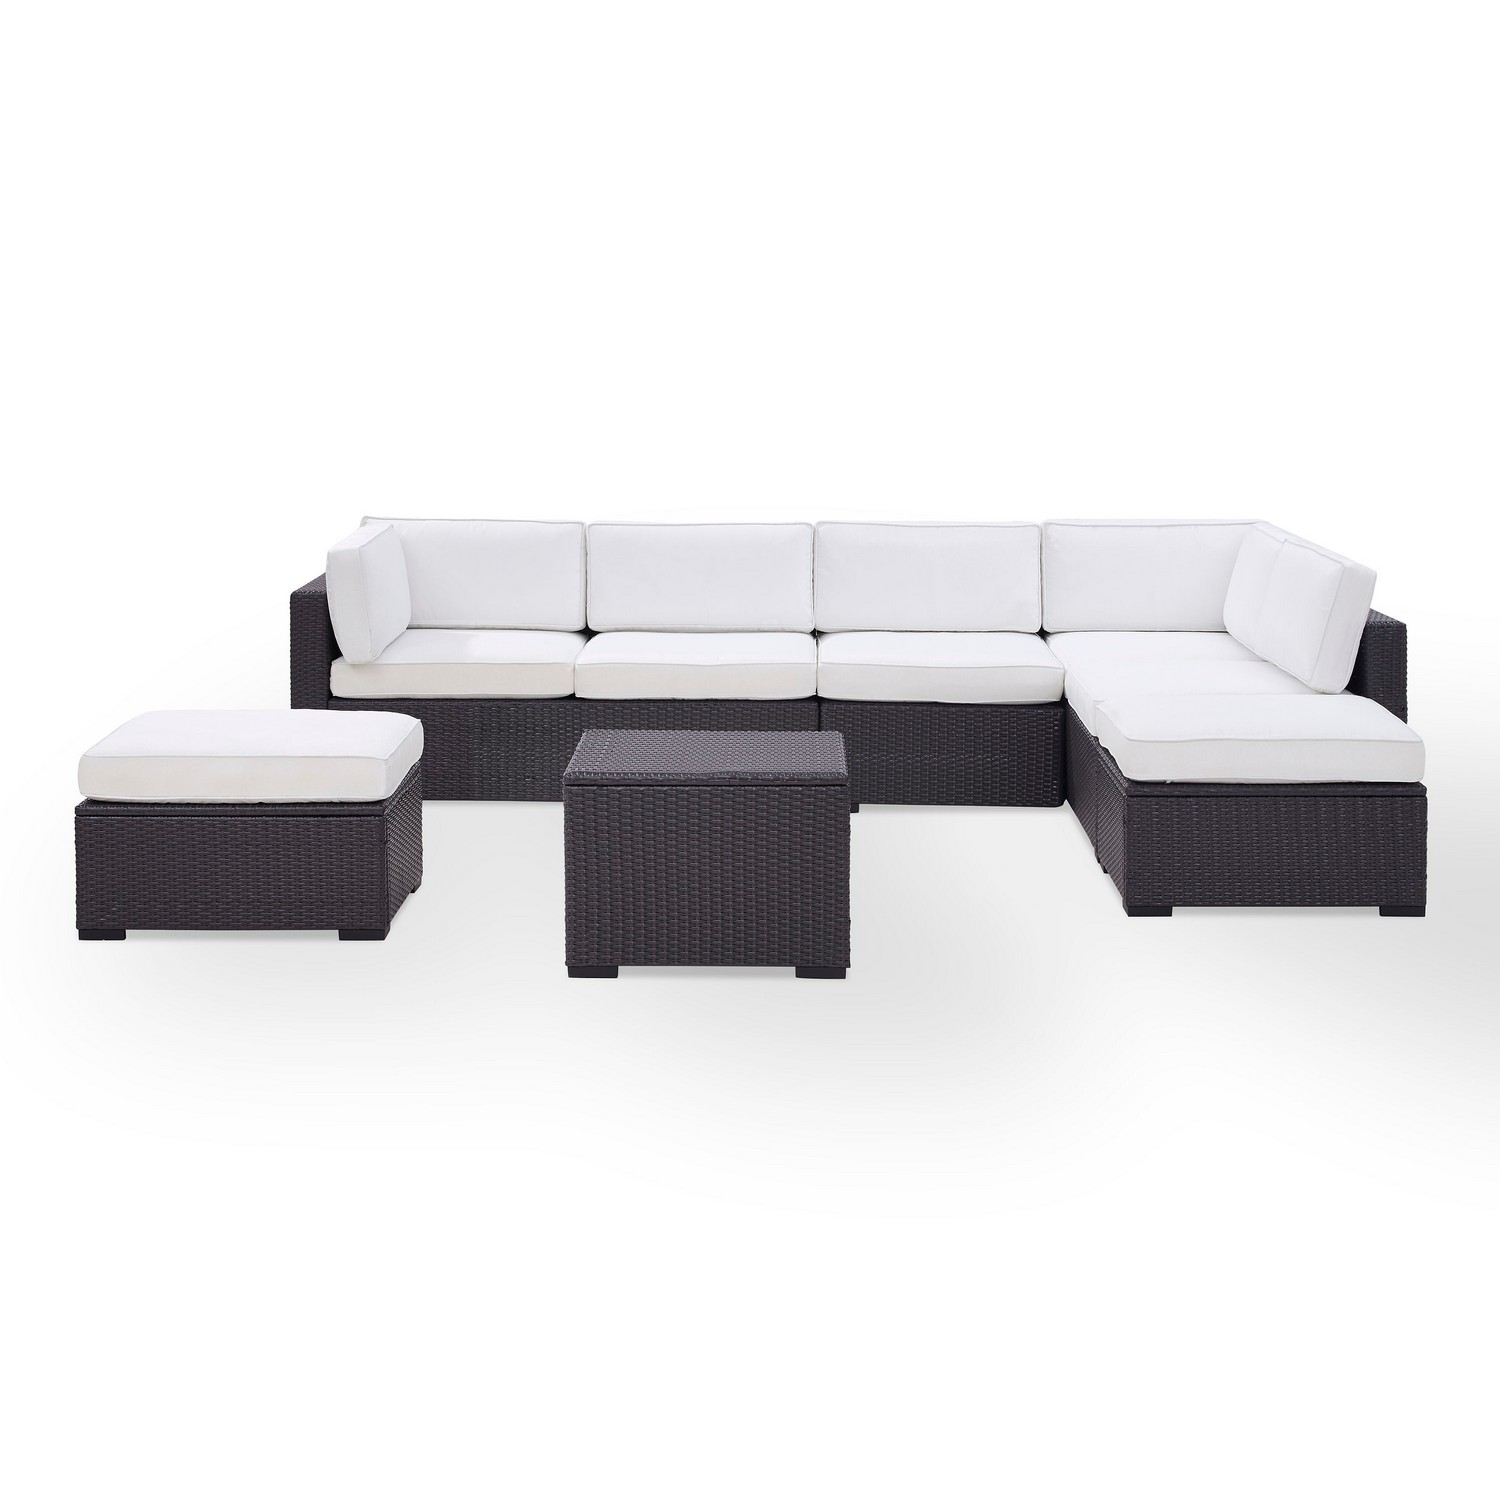 Crosley Biscayne 6-PC Outdoor Wicker Sectional Set - 2 Loveseats, Armless Chair, Coffee Table, 2 Ottomans - White/Brown